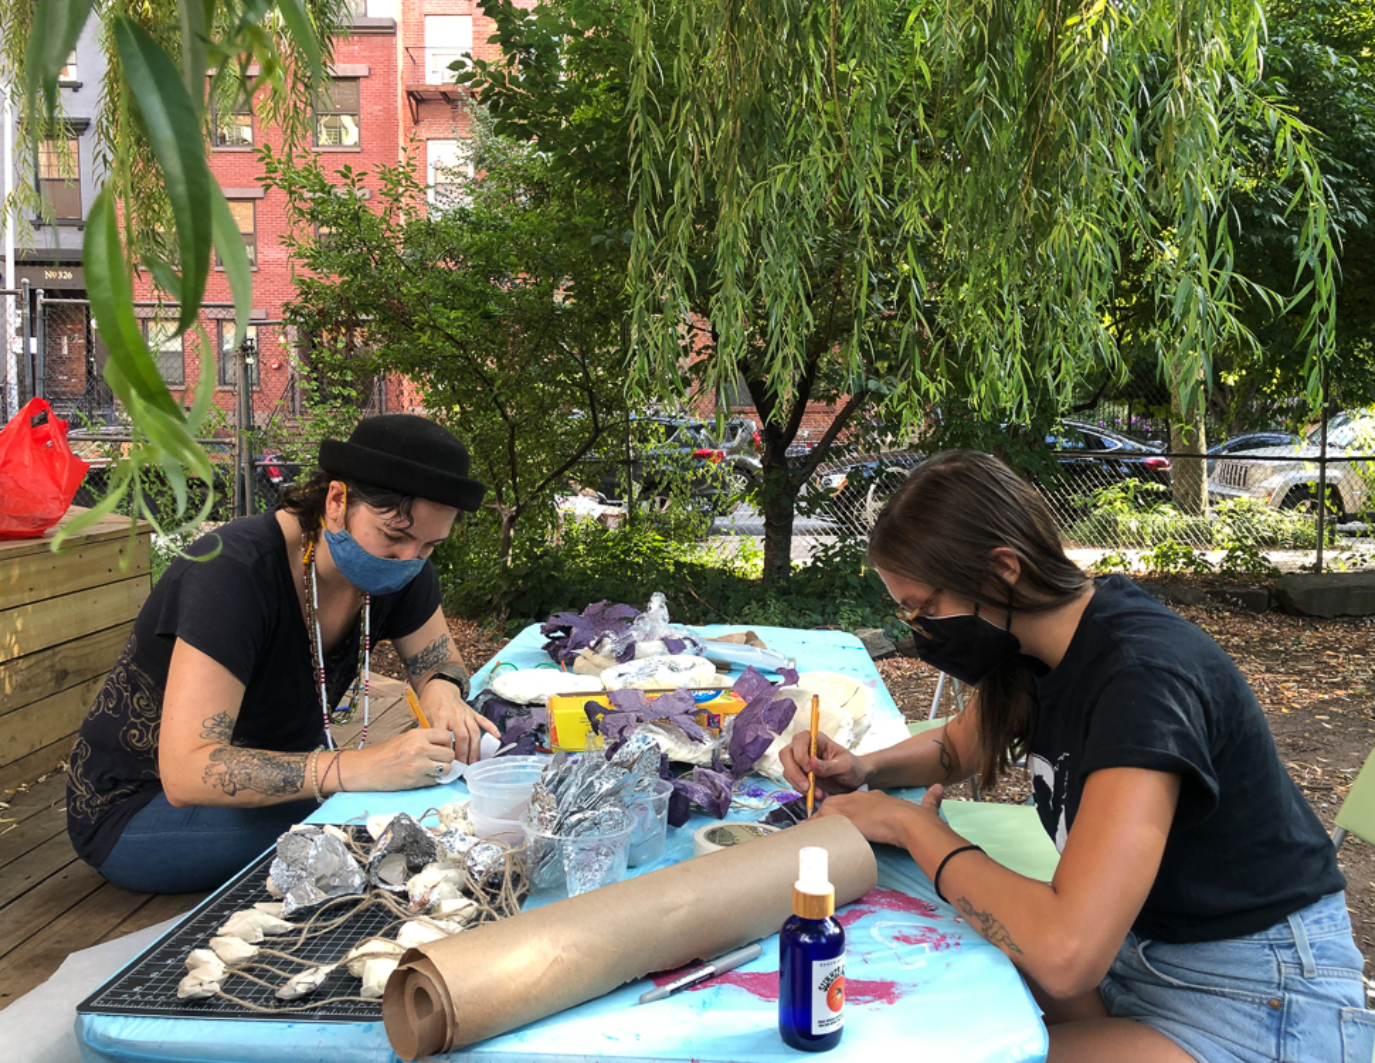 Two artists sit face to face on a blue table, and they both have pencils in their hands and are writing or drawing something. The table is filled with materials for the puppet. In the background, there are trees.